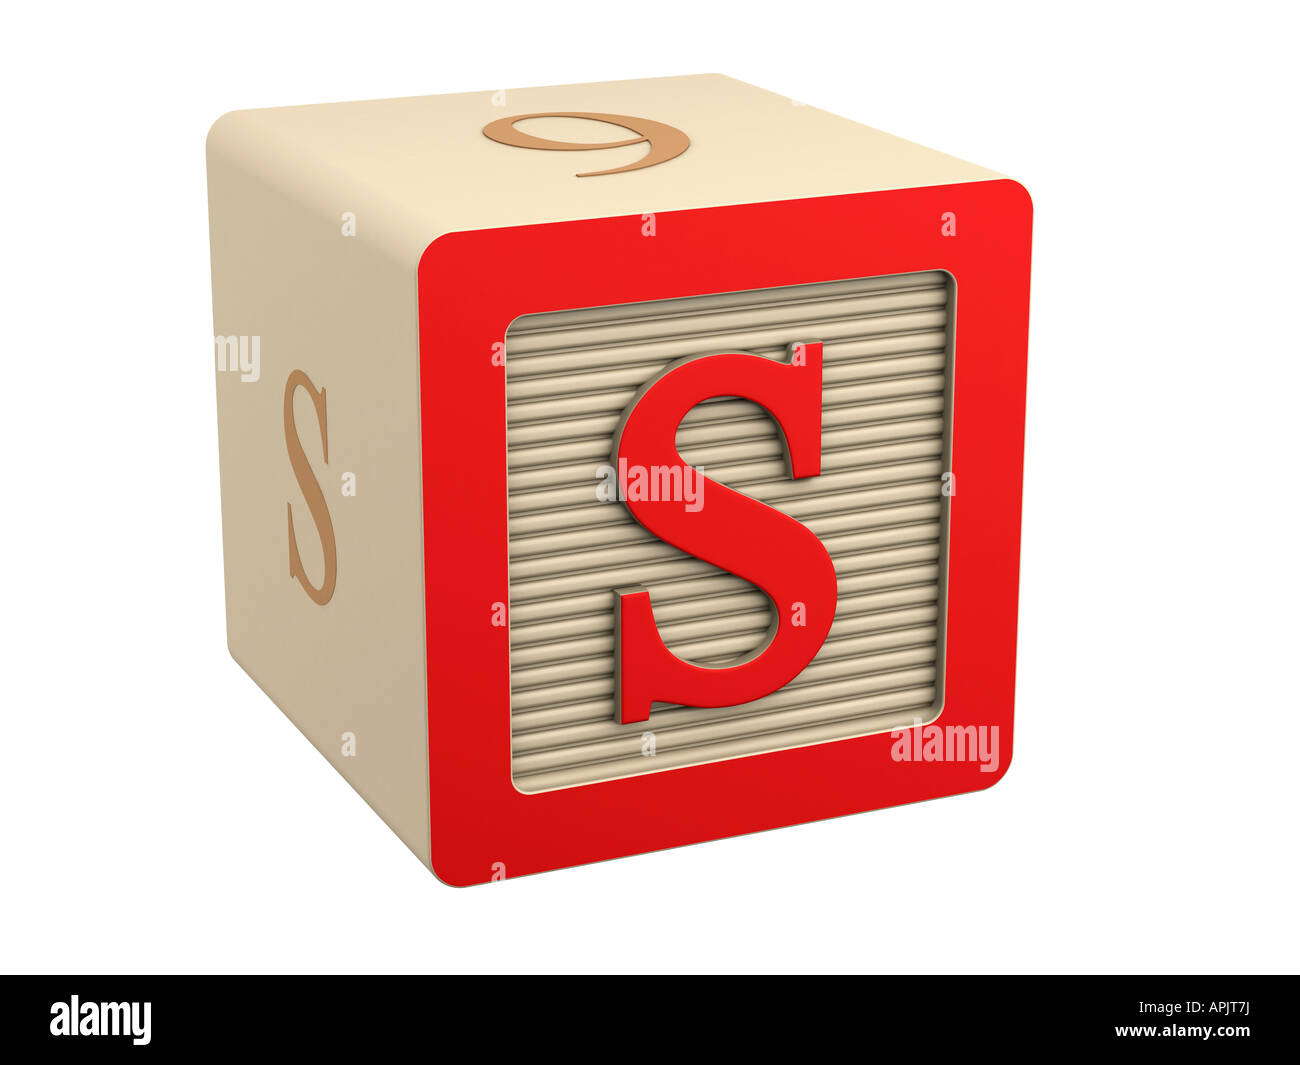 MMS abbreviation written with wood block letter toys Stock Photo - Alamy